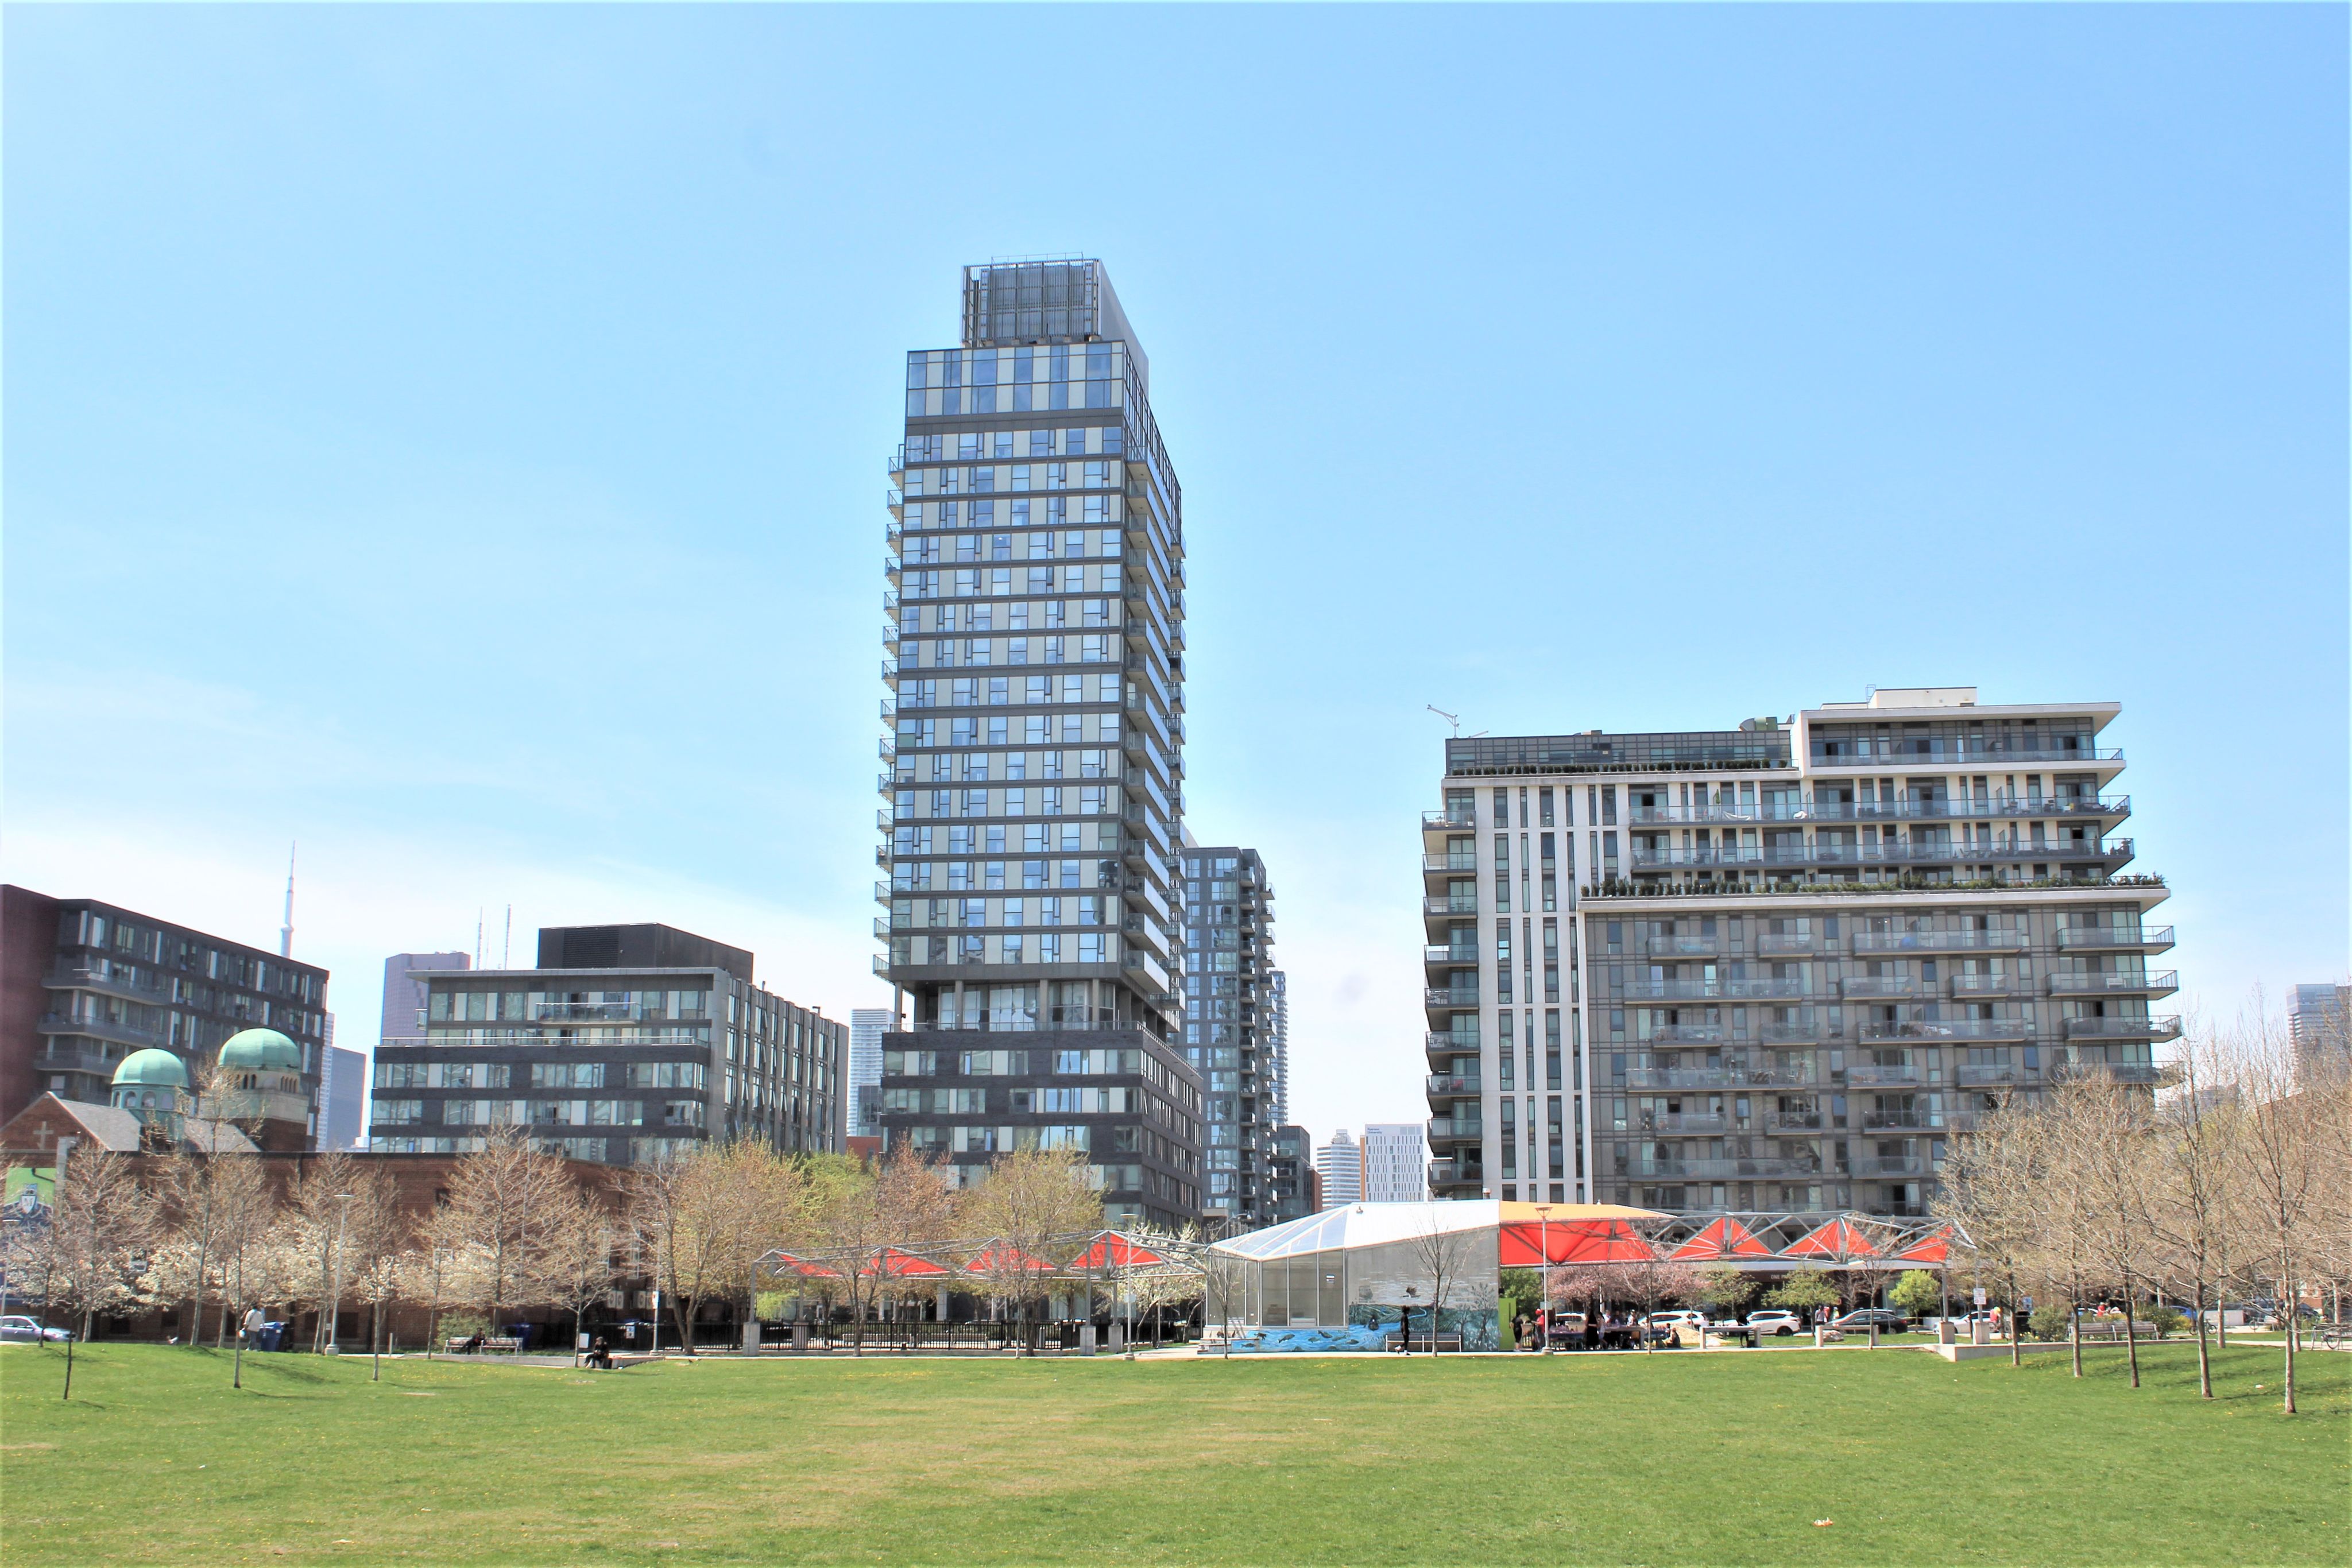 Image of Regent Park - buildings in the background, park in the foreground.